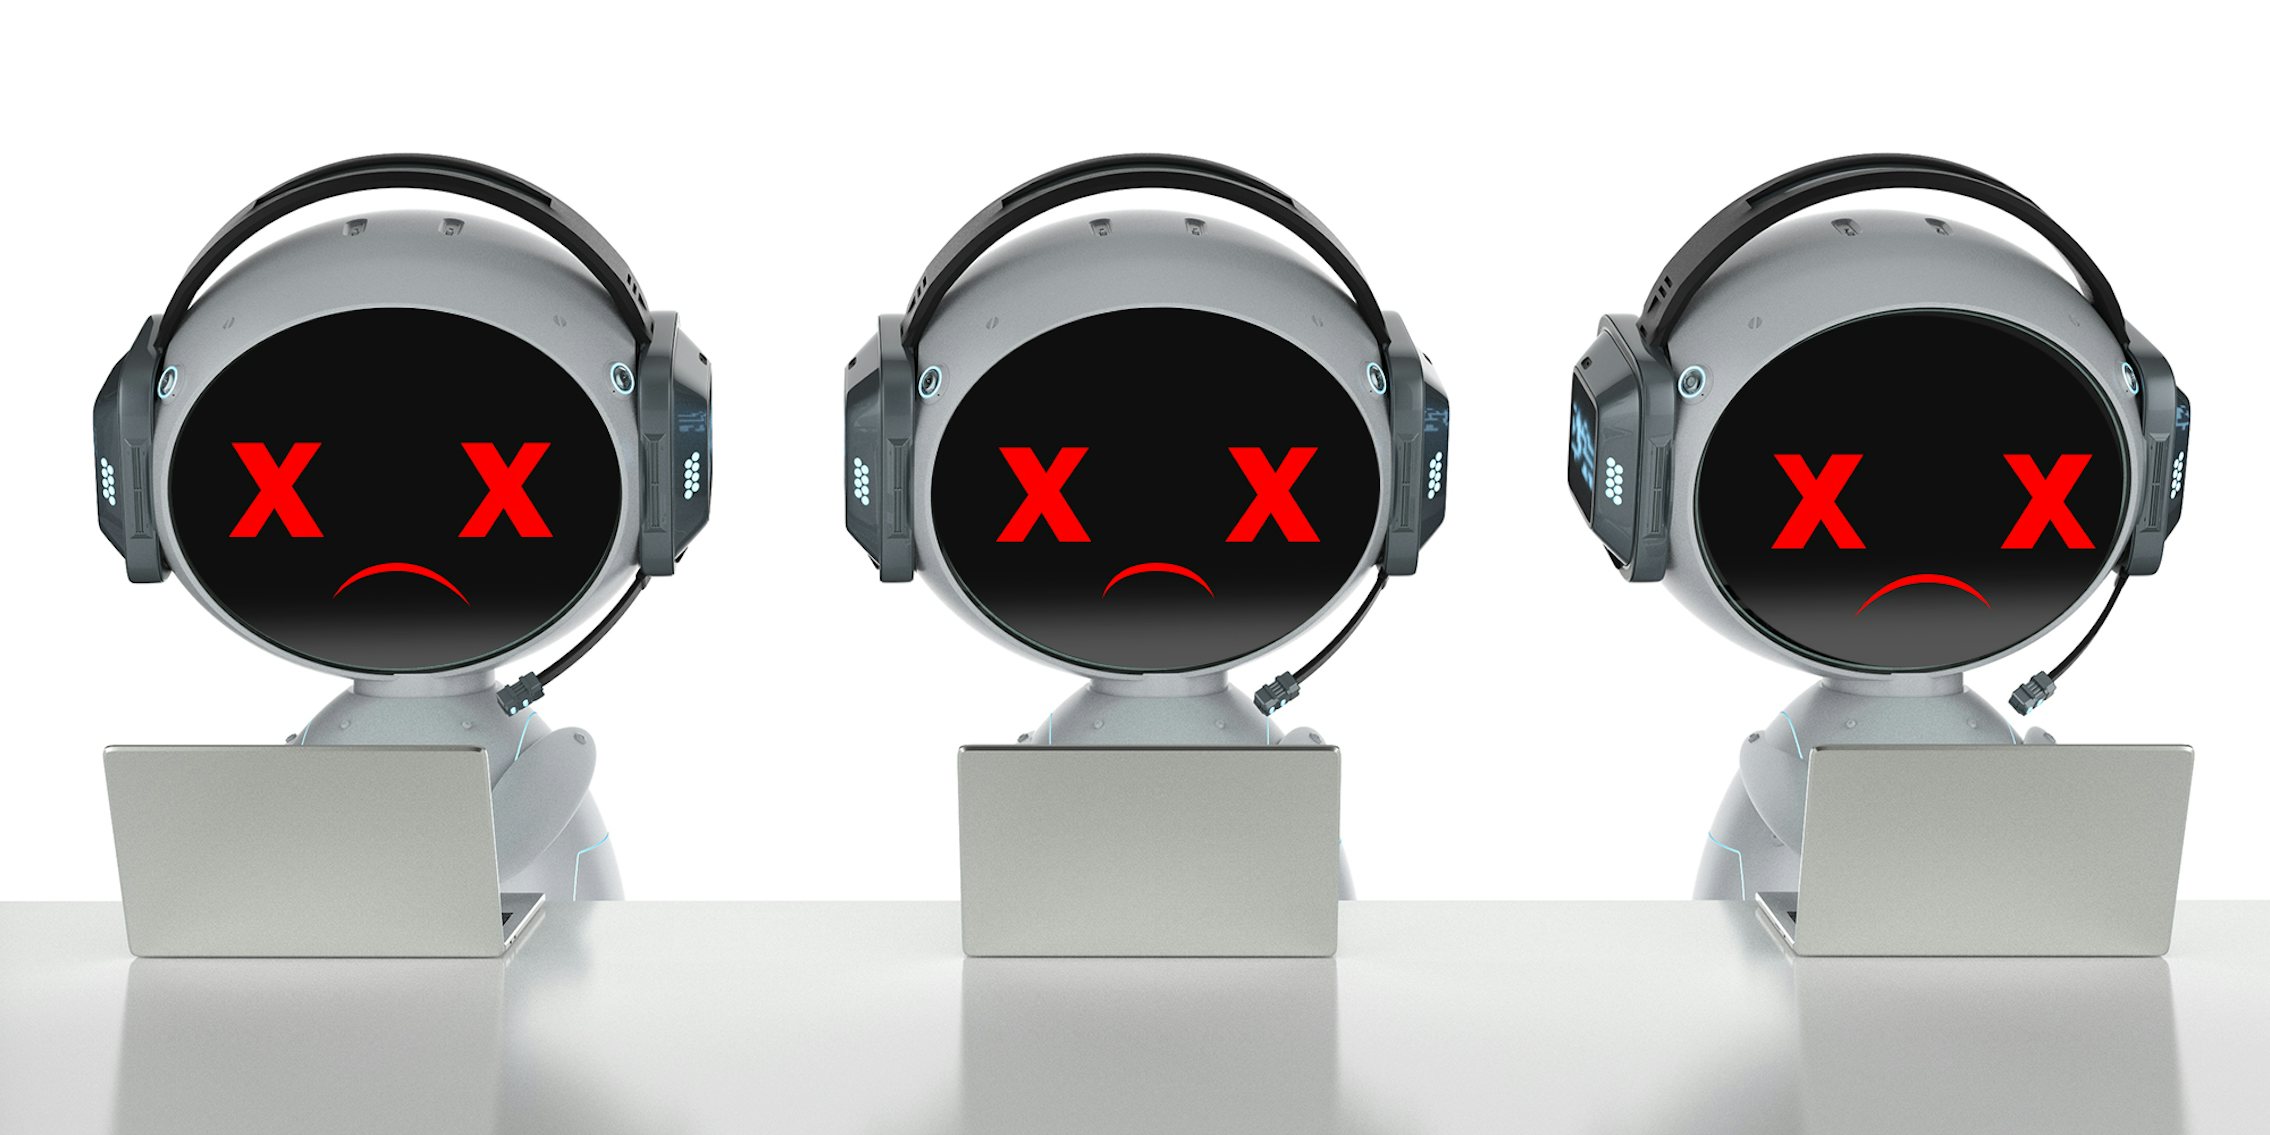 robots with microphone headsets at laptops with X's for eyes and frowns. It is meant to represent robocalls.